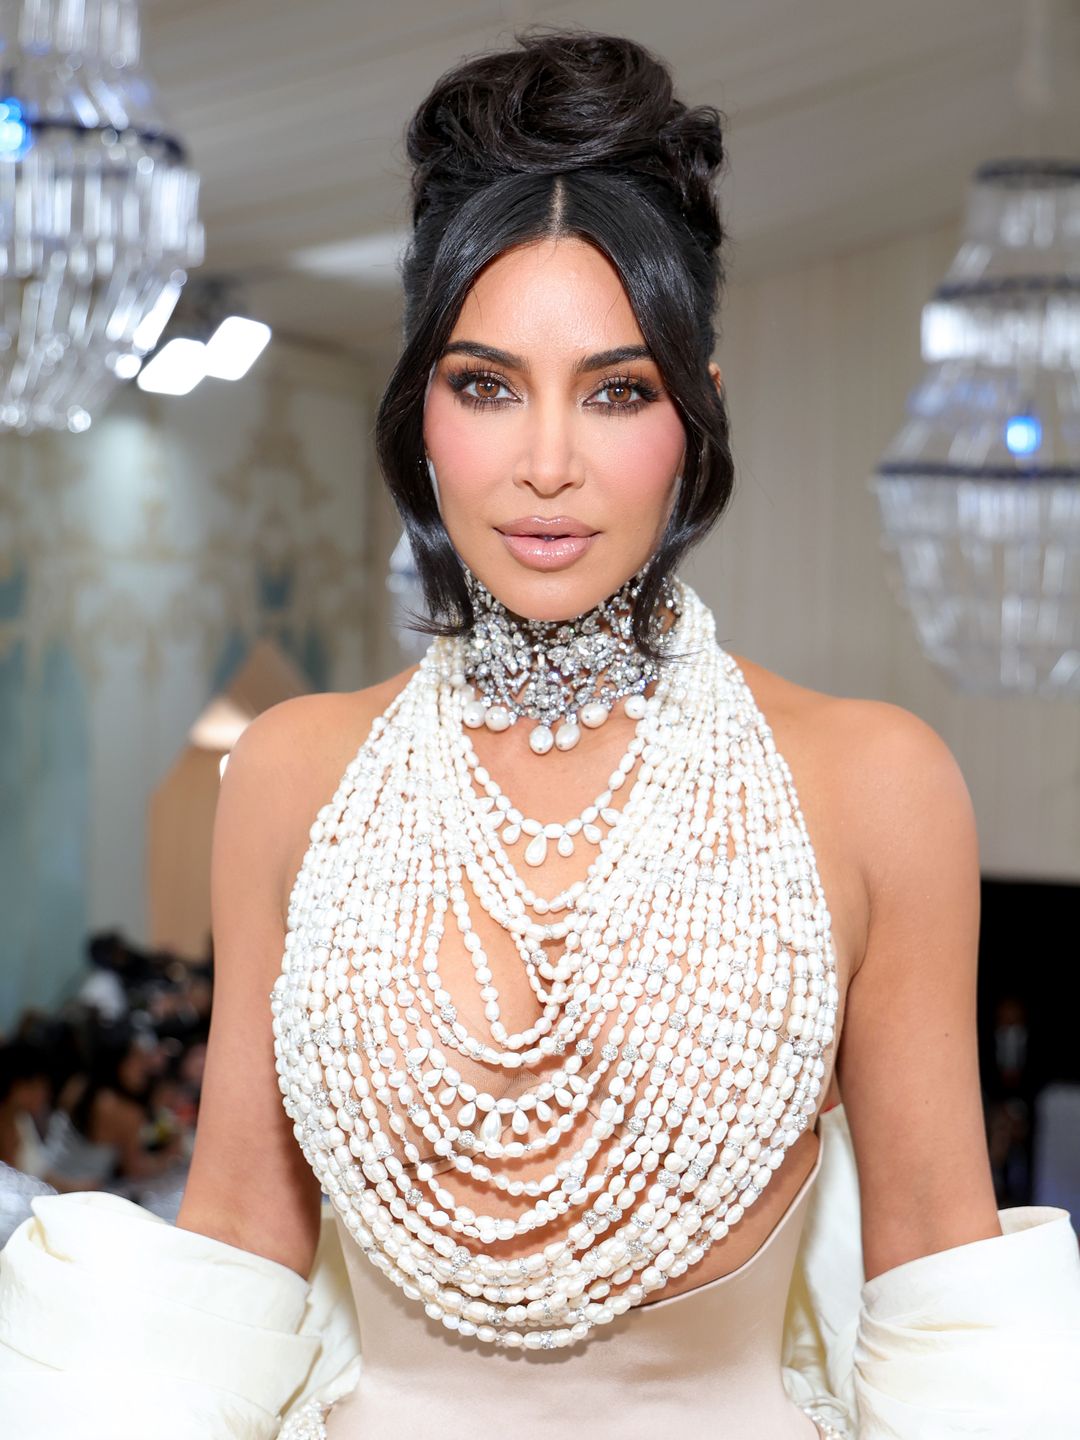 Kim opted for draped pearls by Schiaparelli 